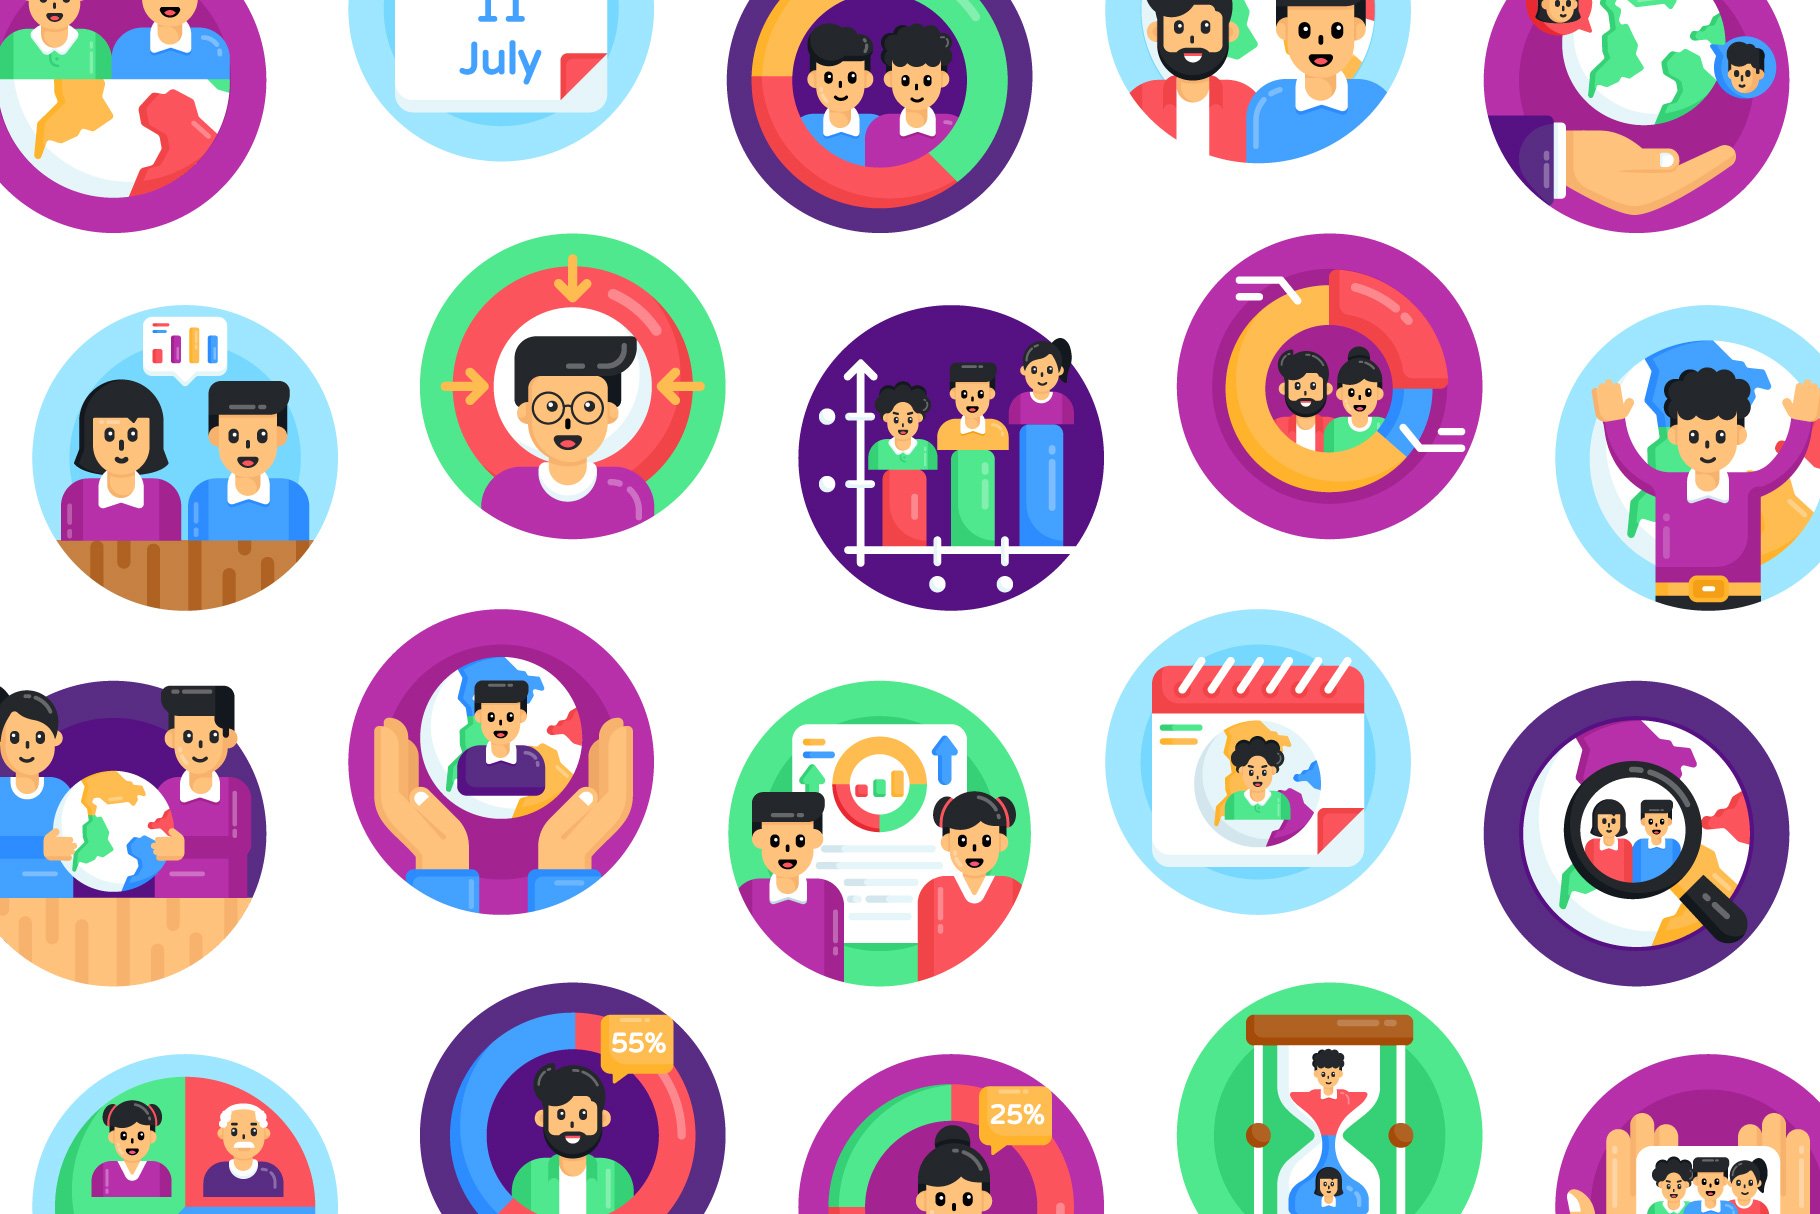 Diverse of colorful population icons.